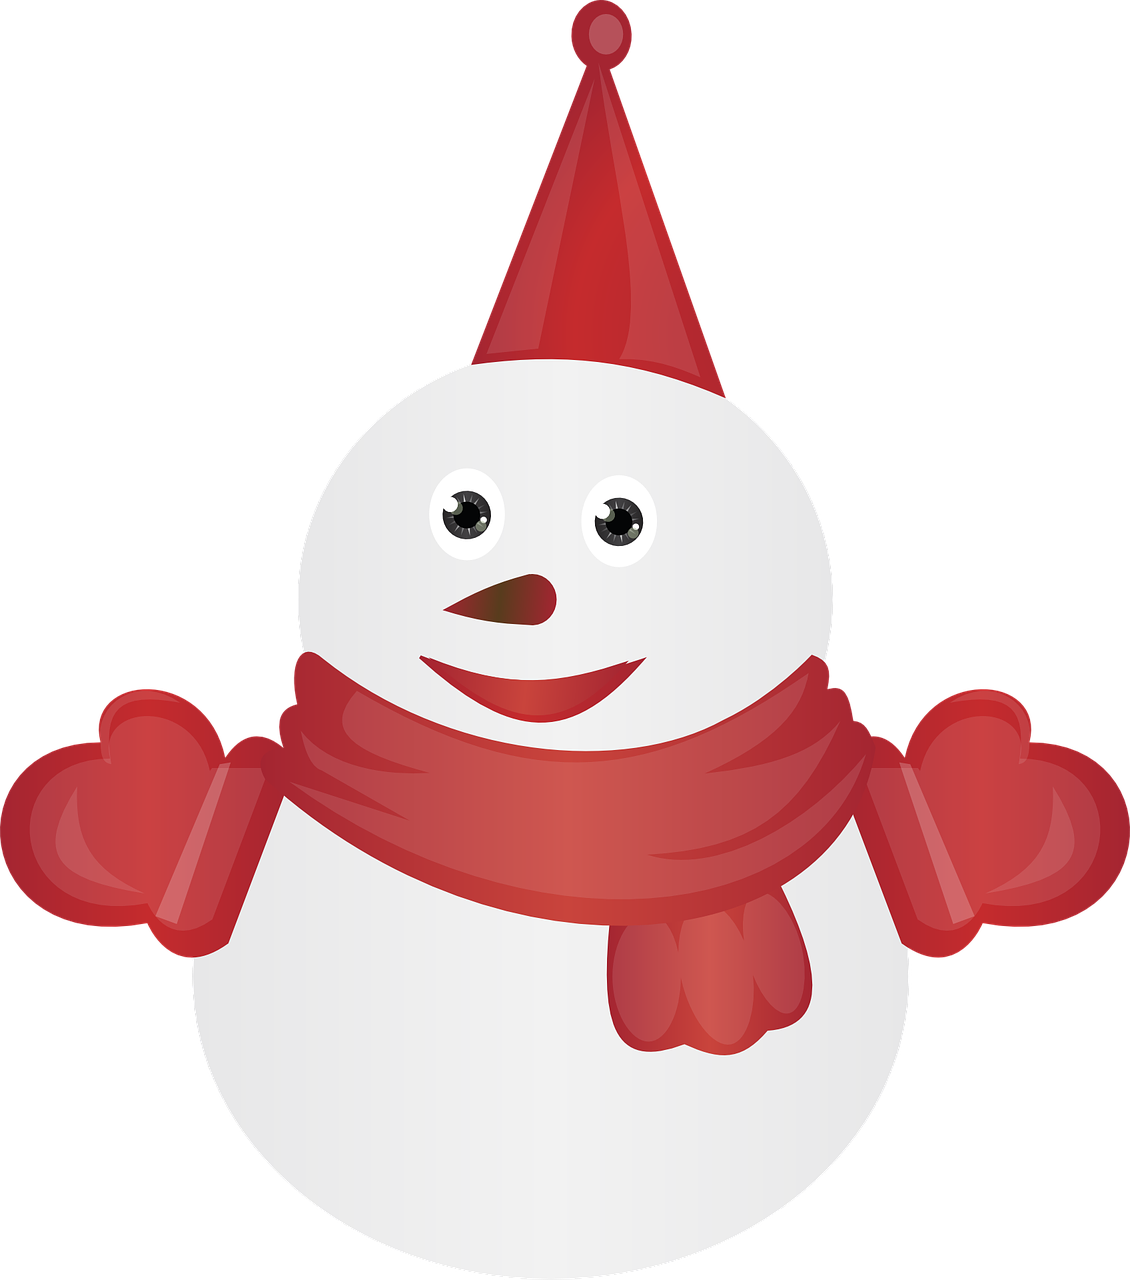 Snowman free to use clipart